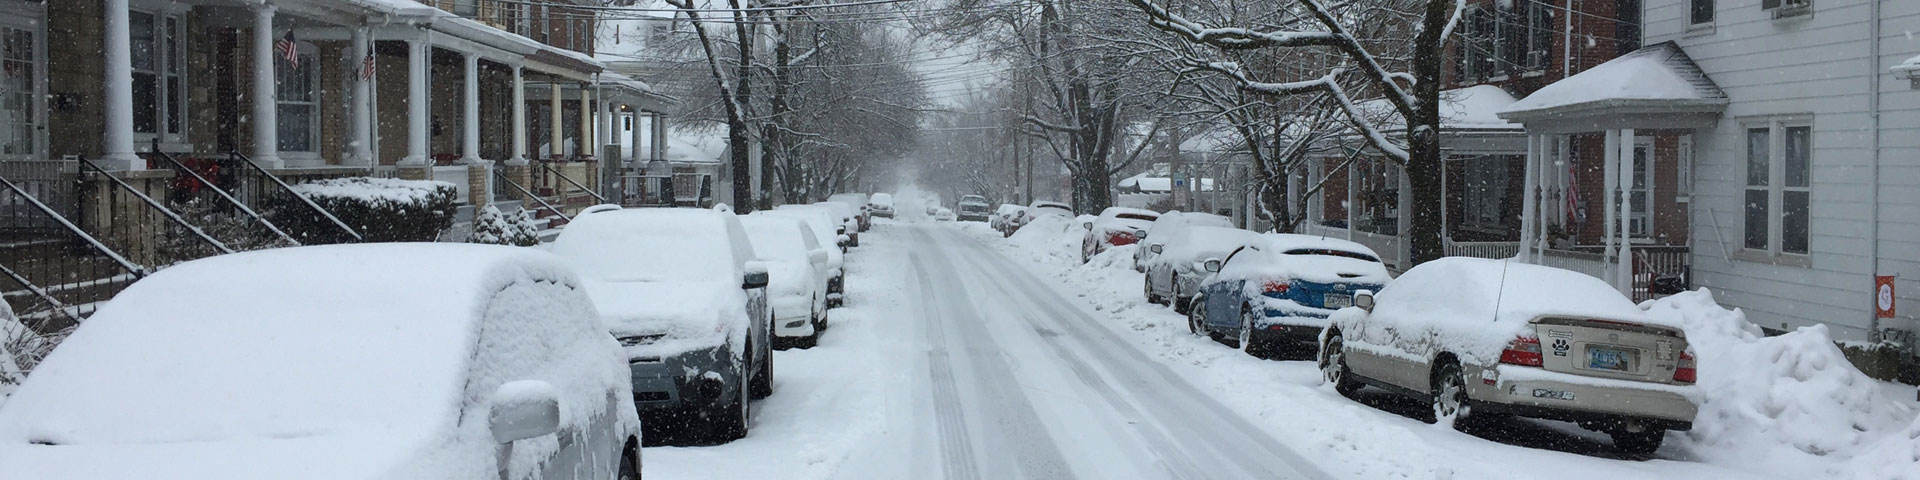 A snow-covered city street lined with cars.